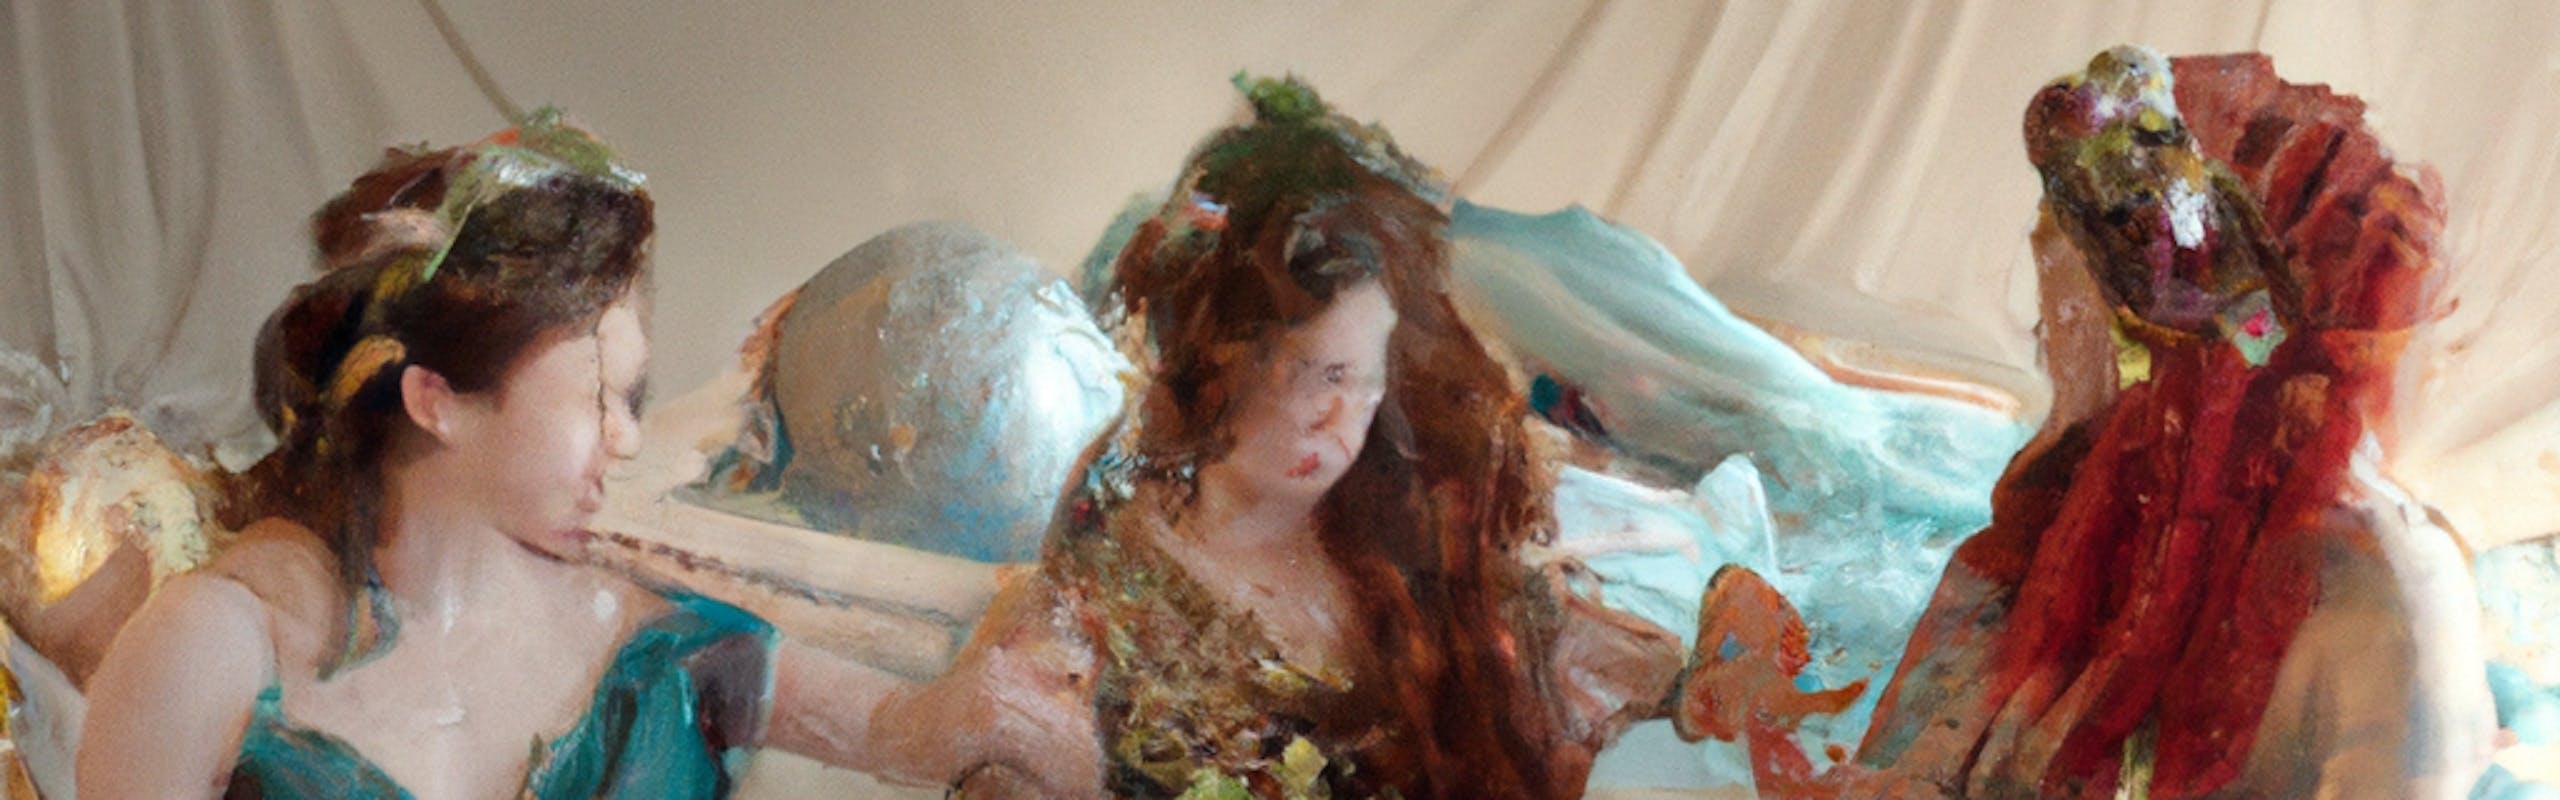 sarah-hoover-luscious-mermaid-birth-party-during-the-flemish-renaissance-with-pre-raphaelite-hair-in-the-style-of-tim-walker